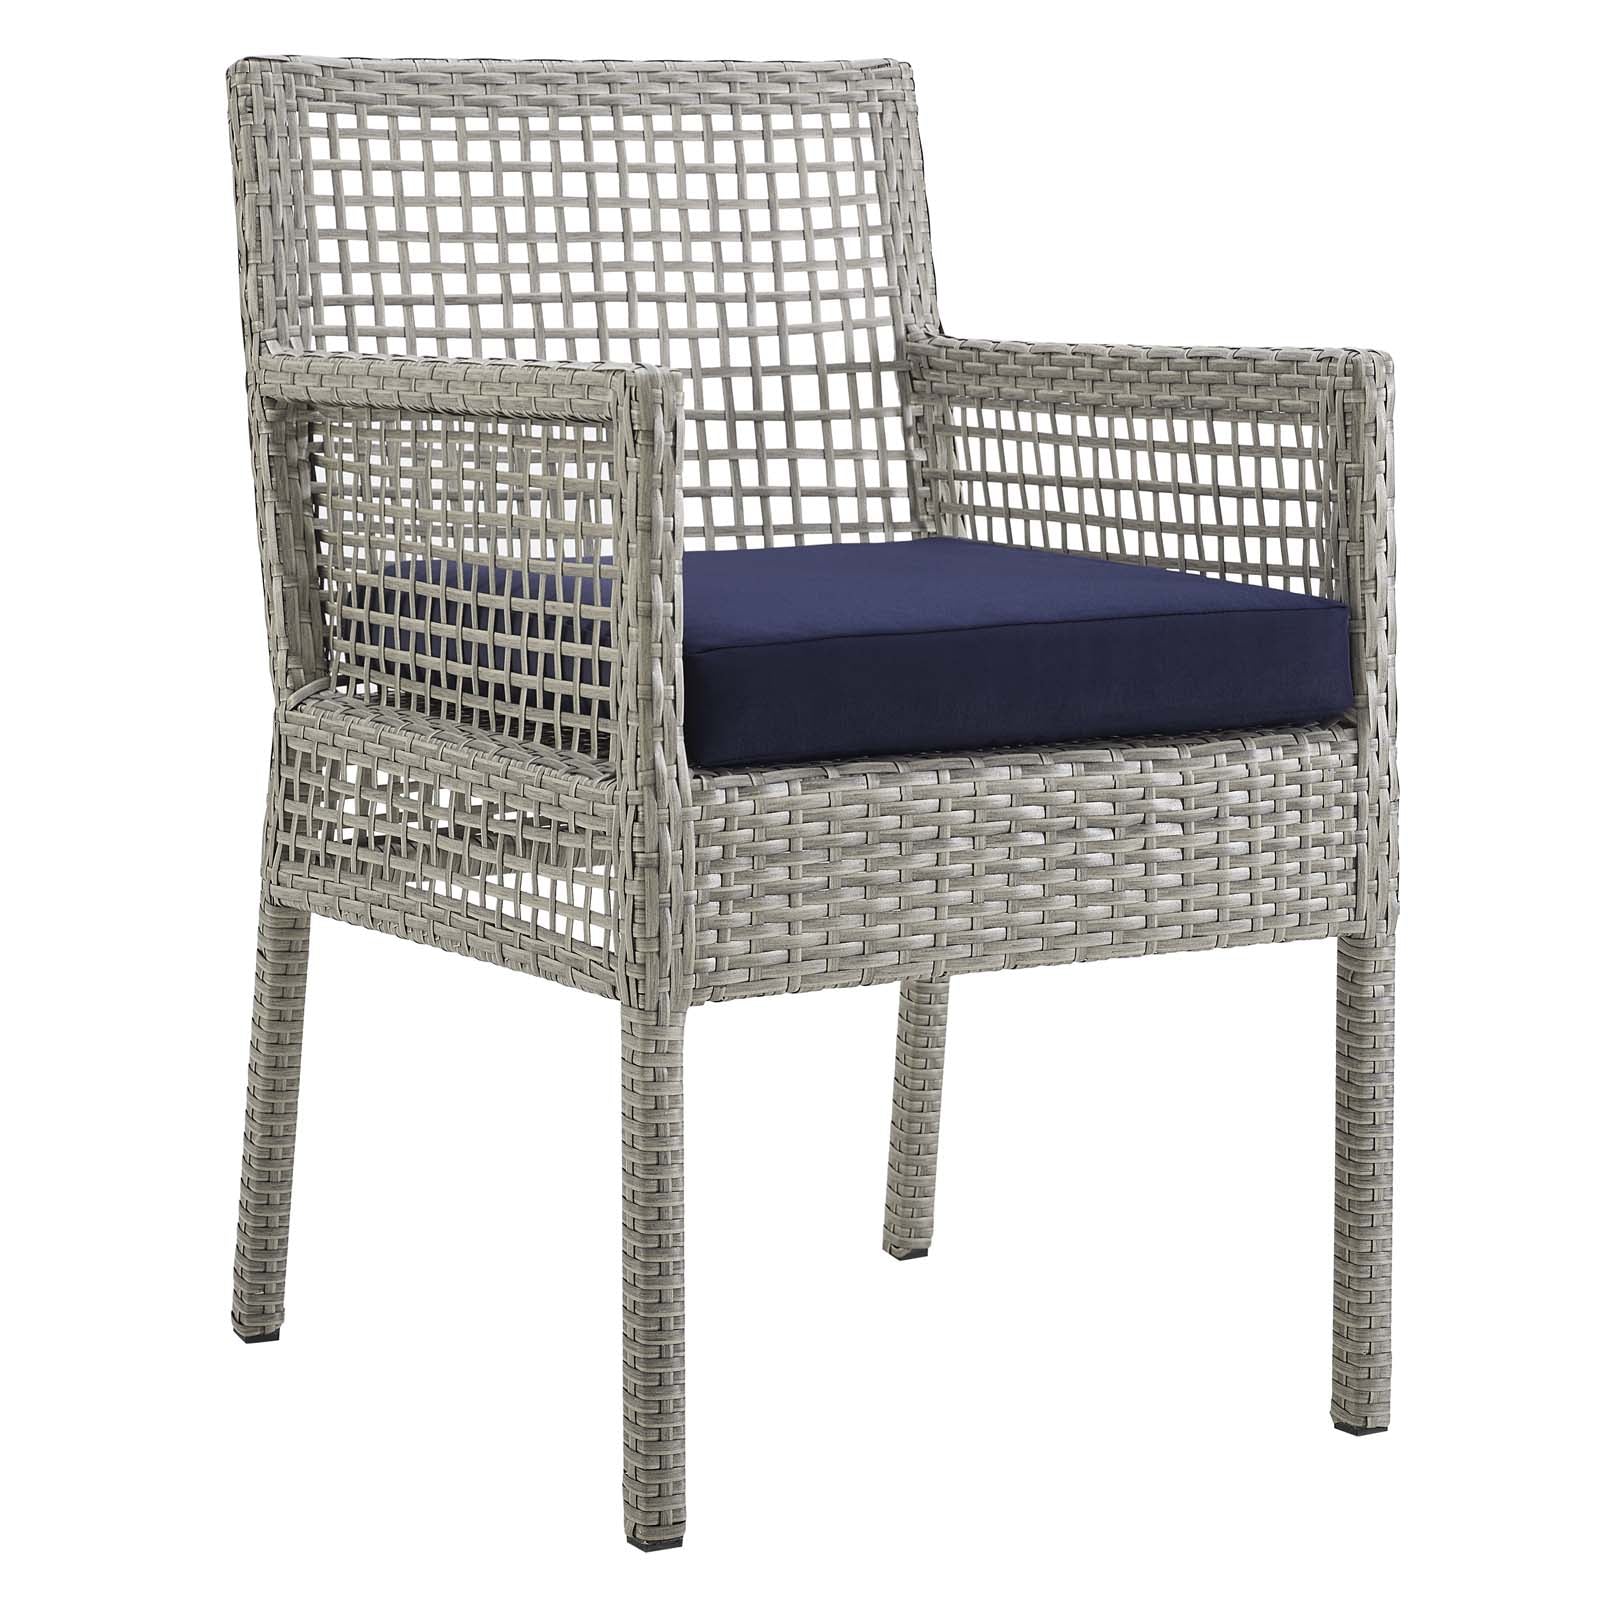 Aura Dining Armchair Outdoor Patio Wicker Rattan Set of 4 - East Shore Modern Home Furnishings